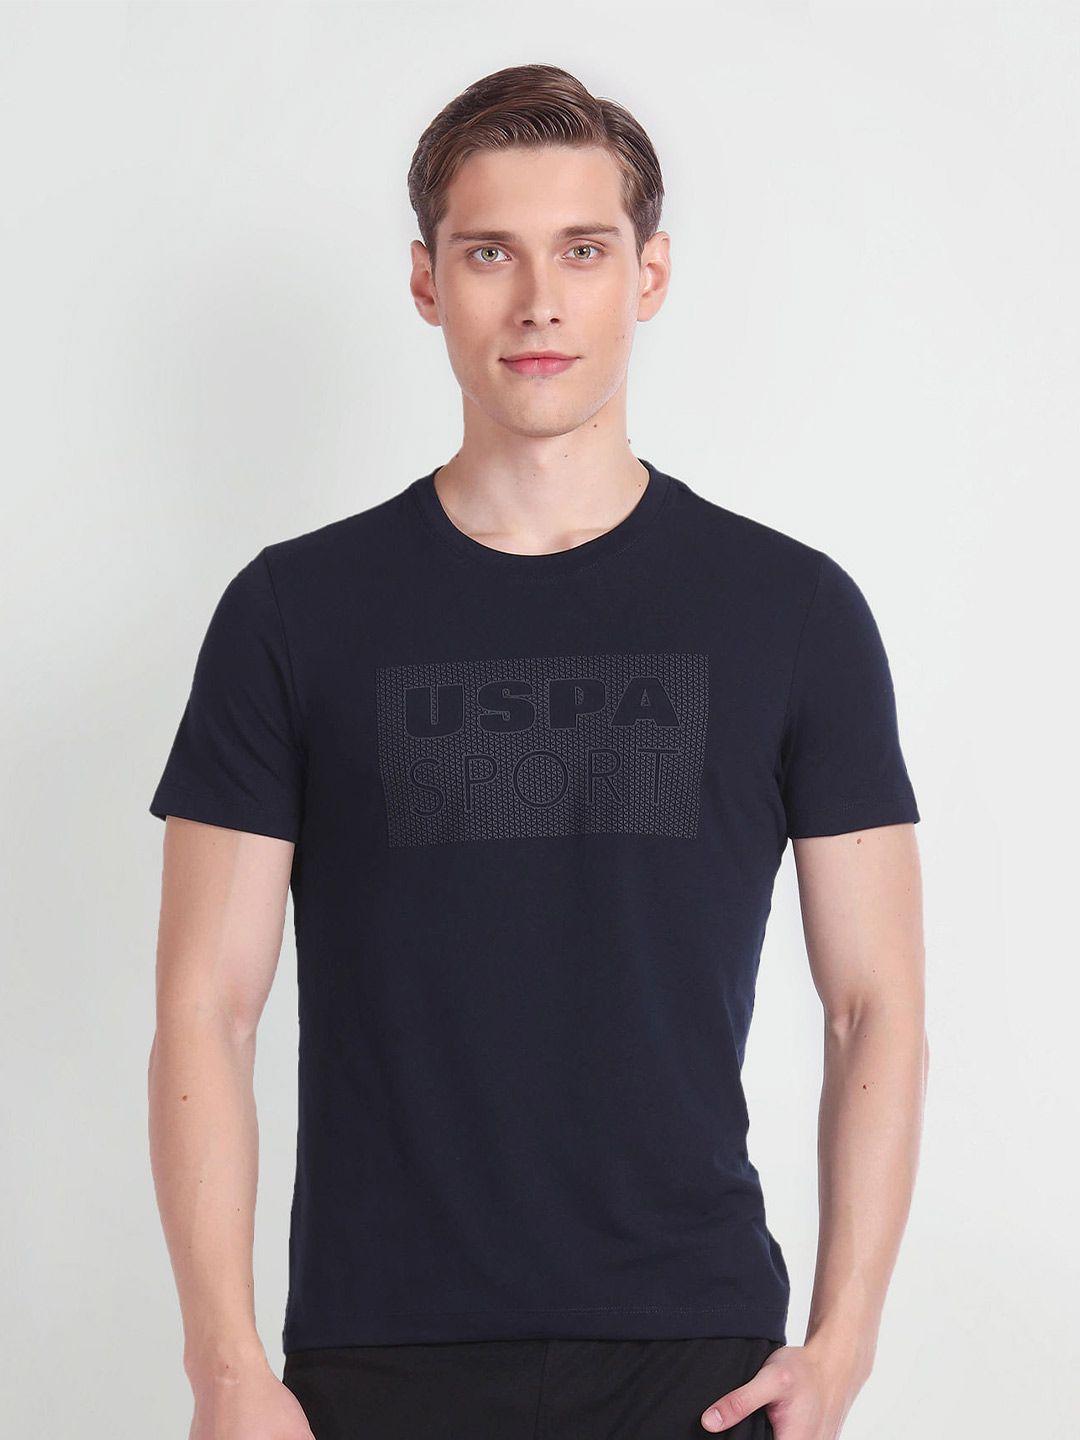 u.s. polo assn. typography printed round neck short sleeves t-shirt